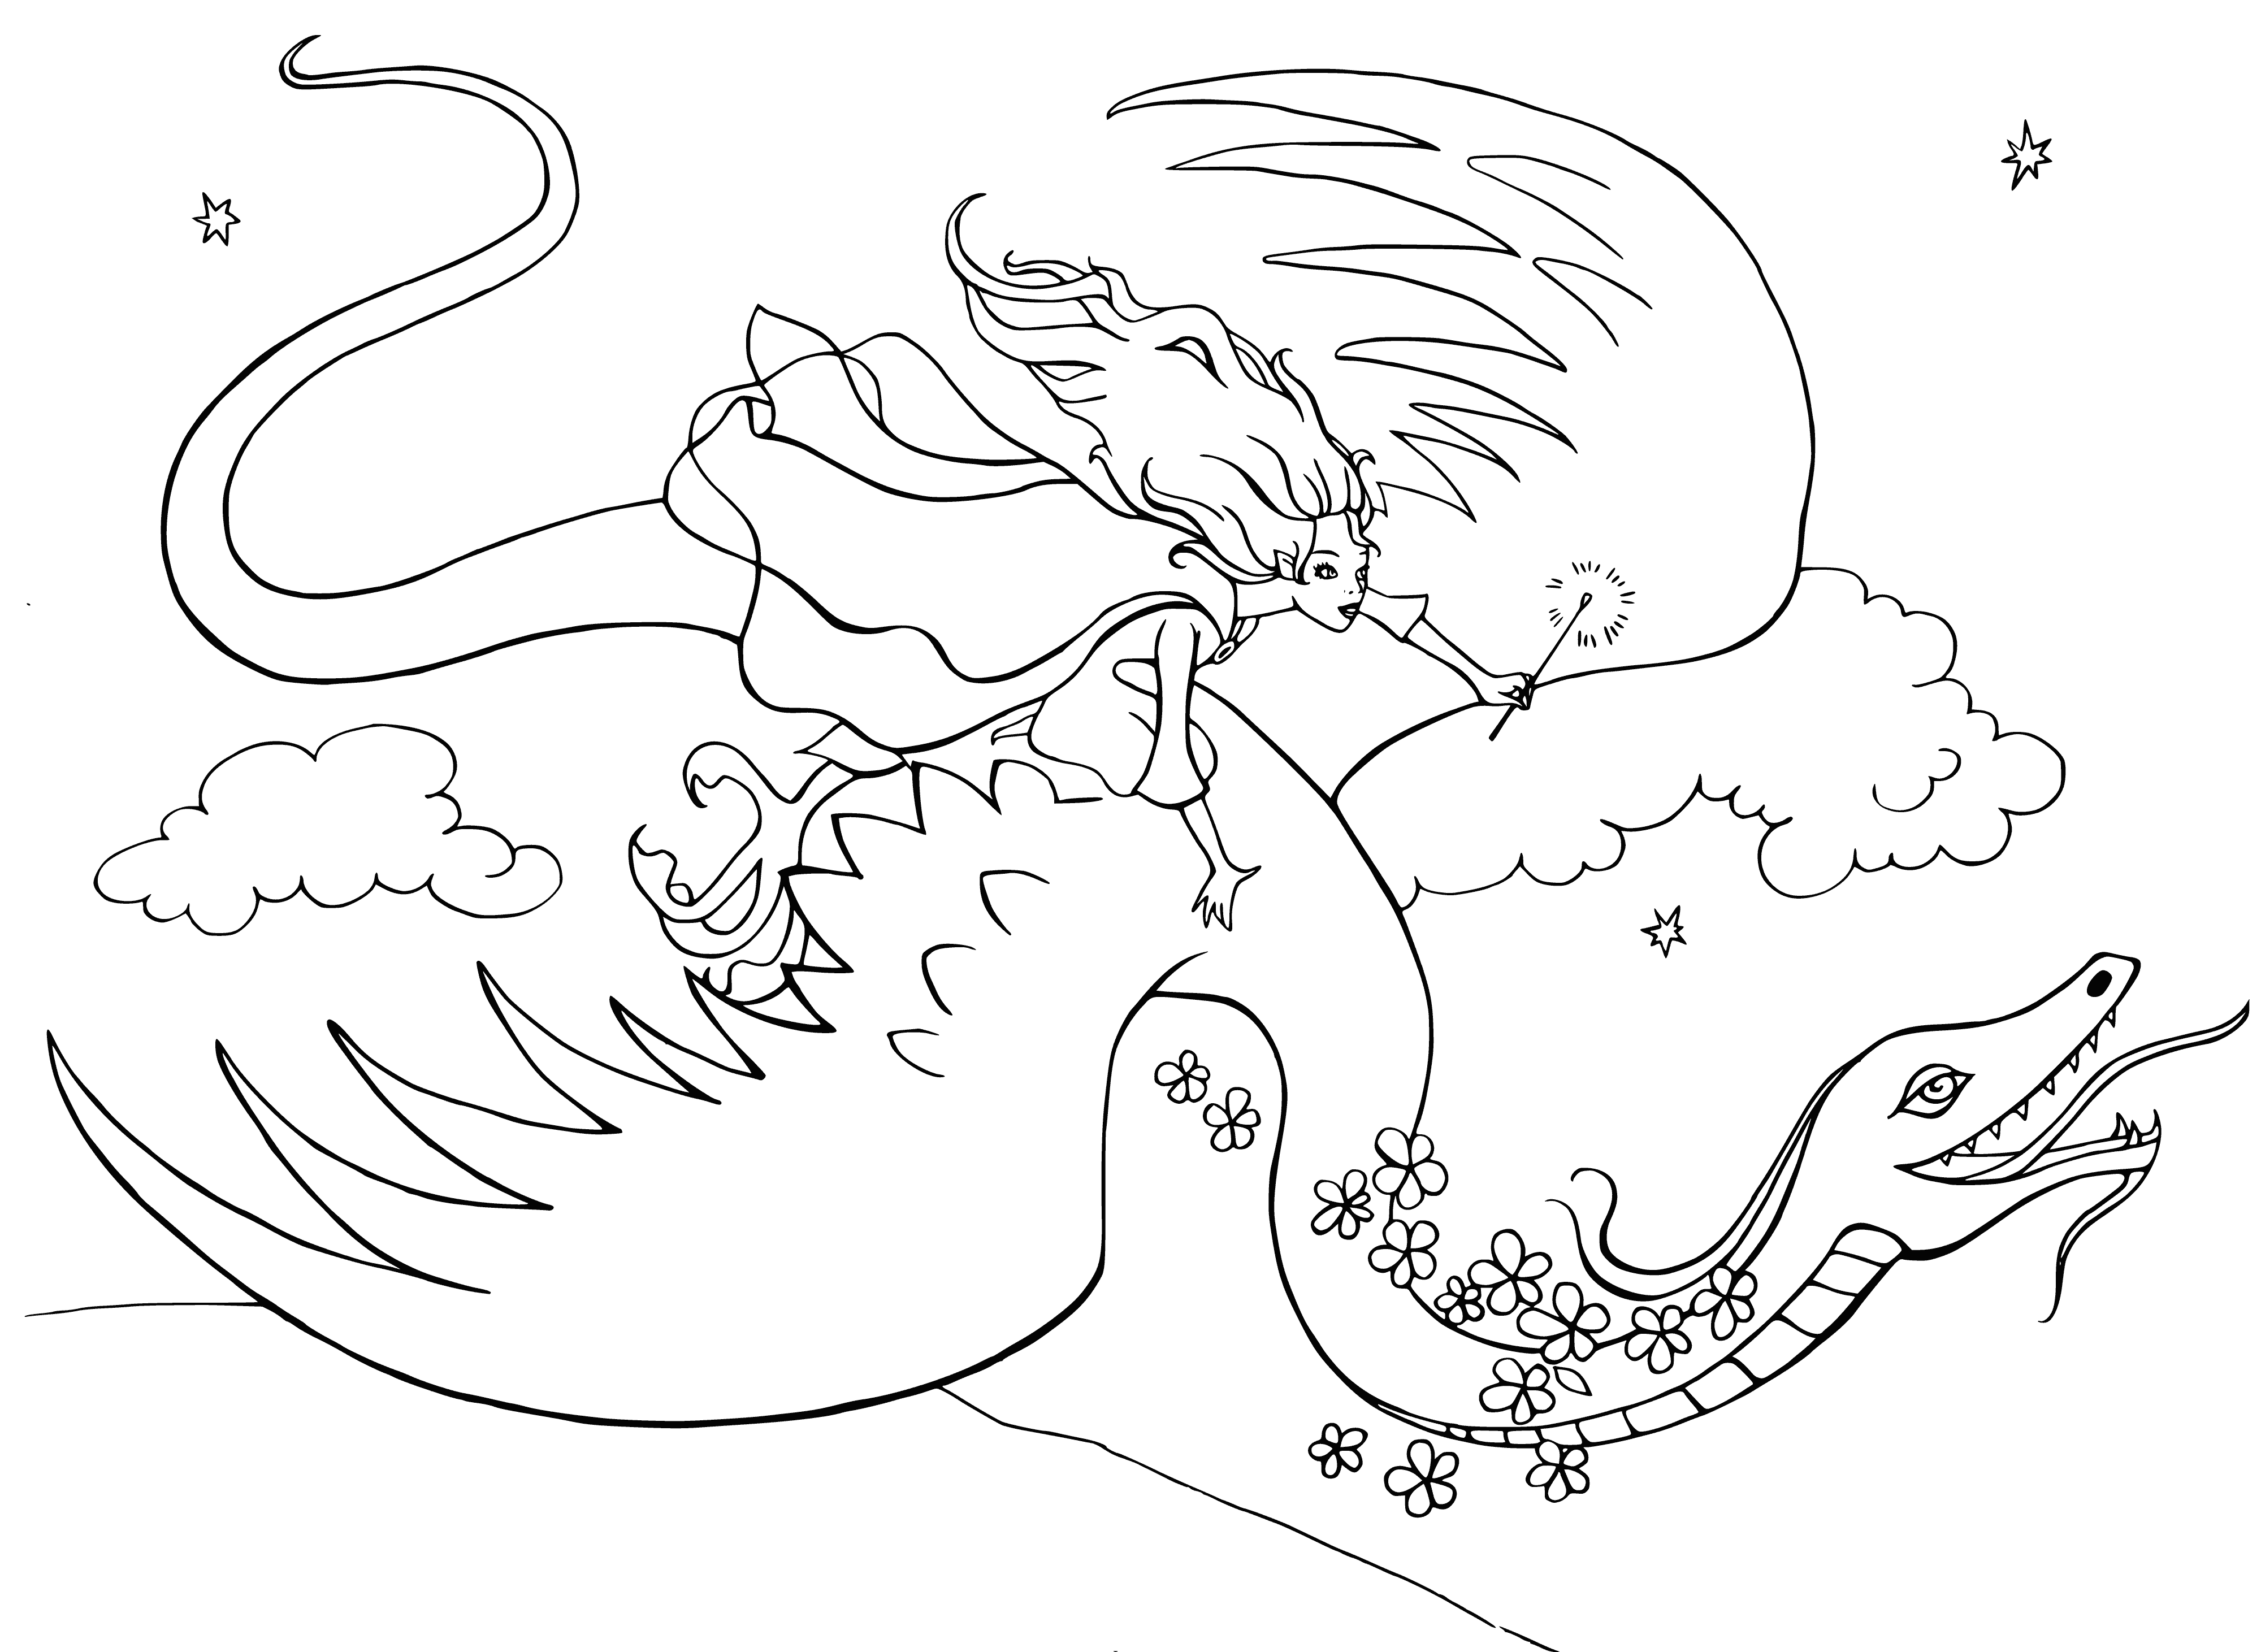 coloring page: Fairy kingdom is large, prosperous w/wide range of creatures + plant life. At its center is an ice-like palace, full of friendly fairies living+riding a friendly dragon. #FairiesAndDragons